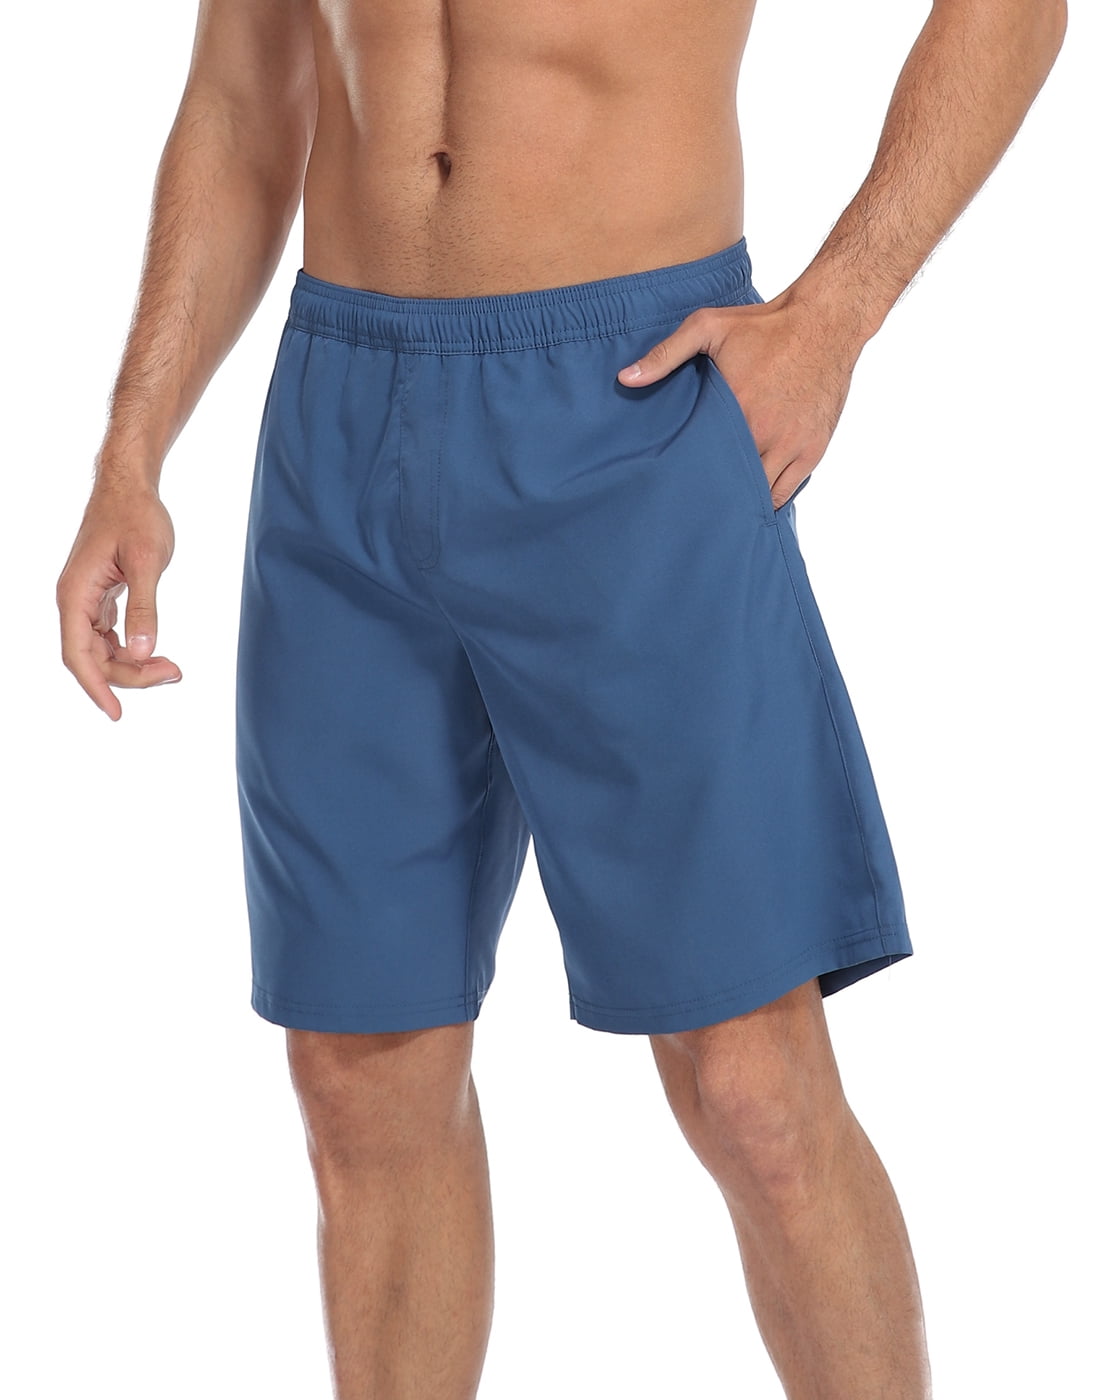 BRISIRA Mens Swim Trunks 9 inch Inseam Board Shorts with Compression Liner Swimsuit Bathing Suit Quick Dry Cargo Pocket